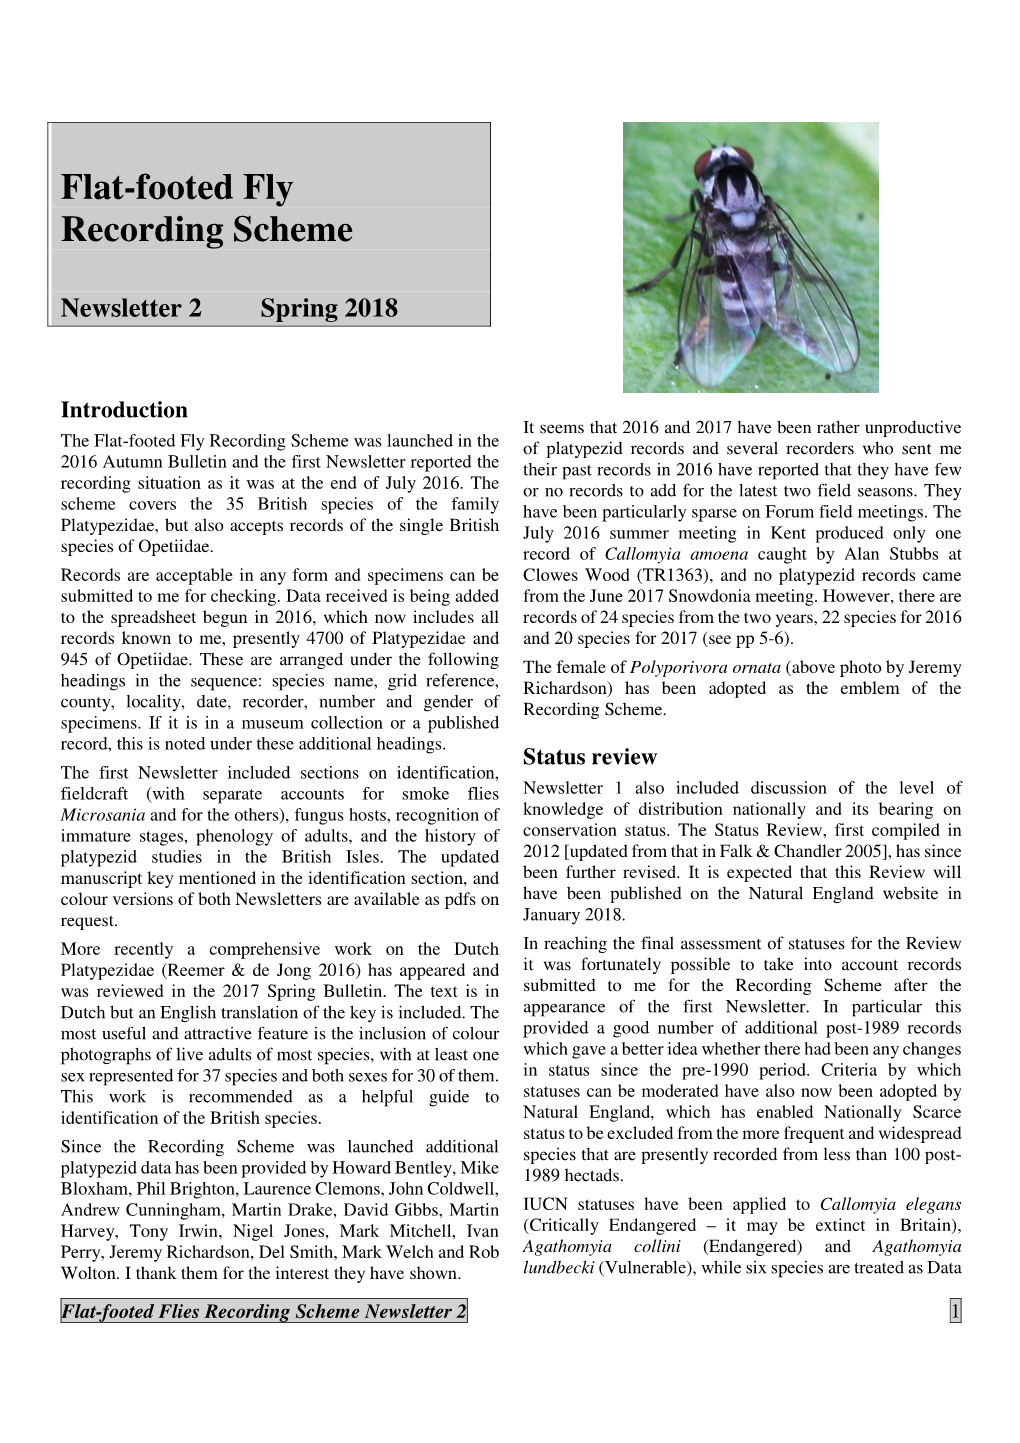 Flat-Footed Fly Recording Scheme